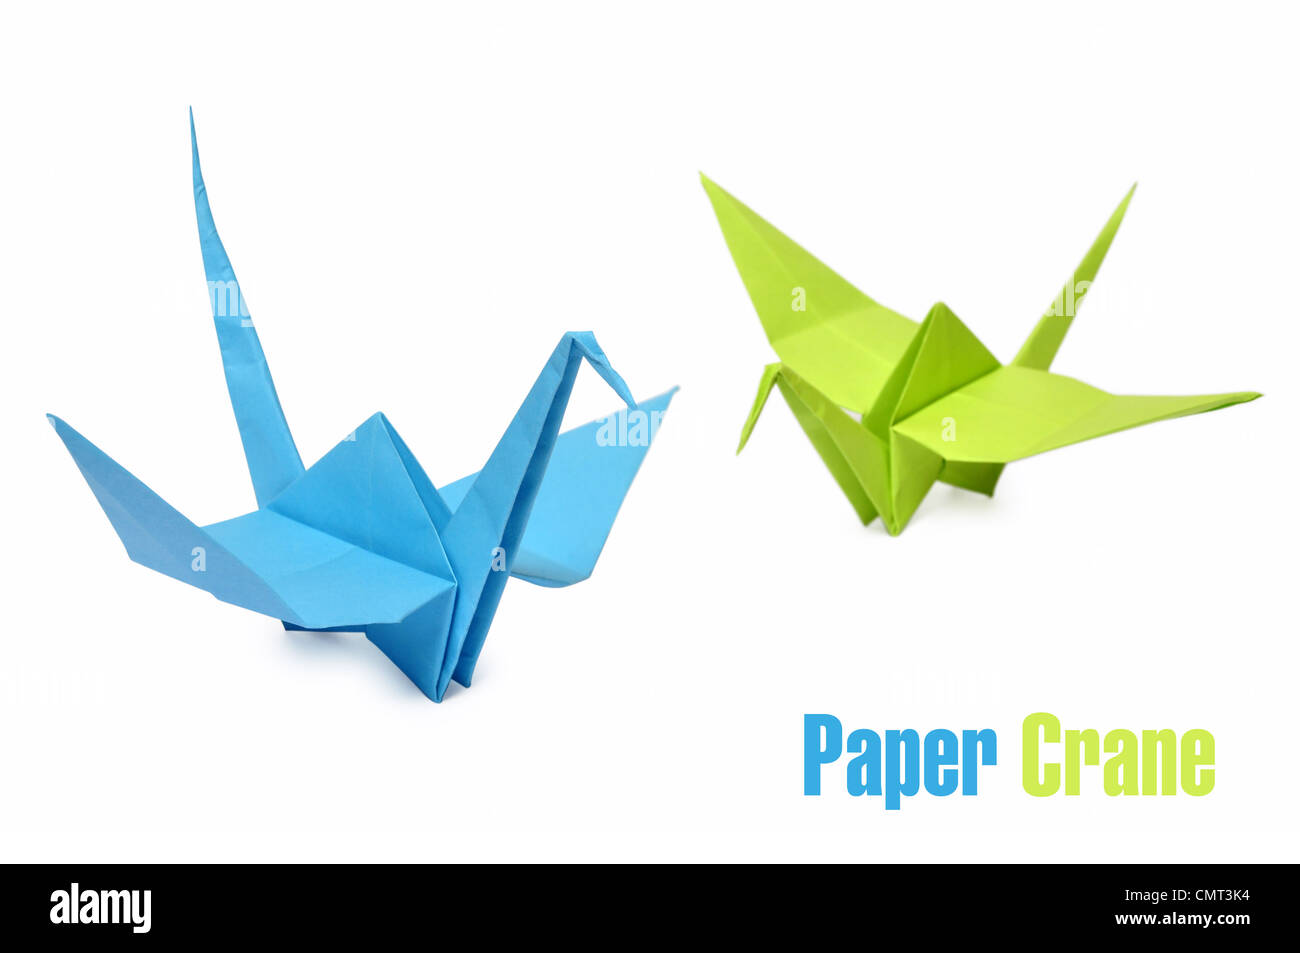 Traditional Japanese origami cranes made from blue and green paper over white background Stock Photo